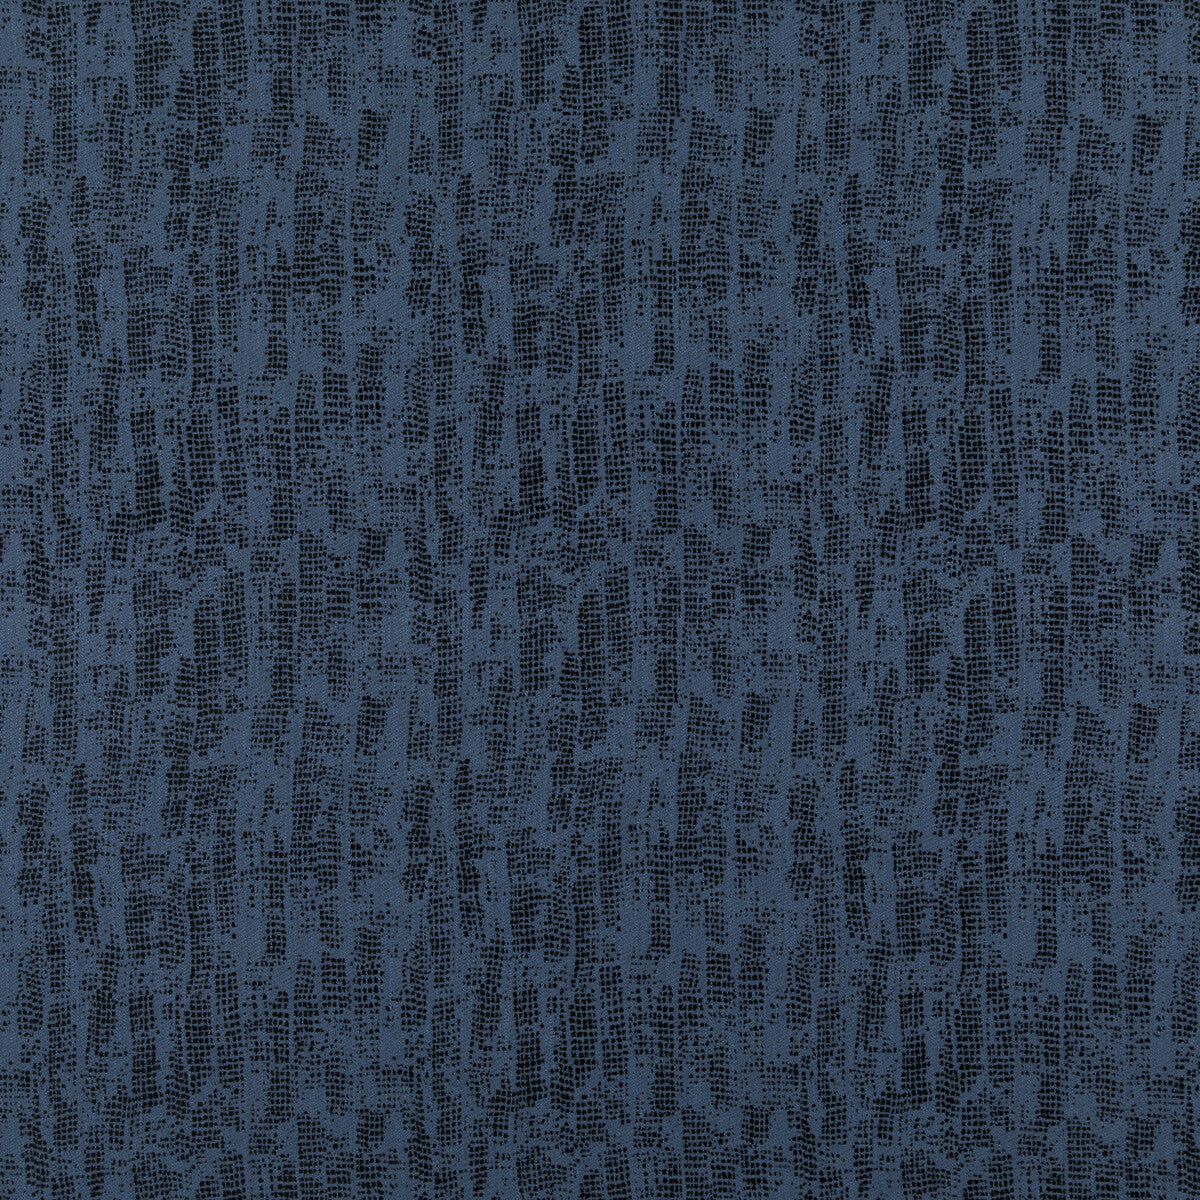 Verse fabric in marine/onyx color - pattern GWF-3735.158.0 - by Lee Jofa Modern in the Kelly Wearstler IV collection